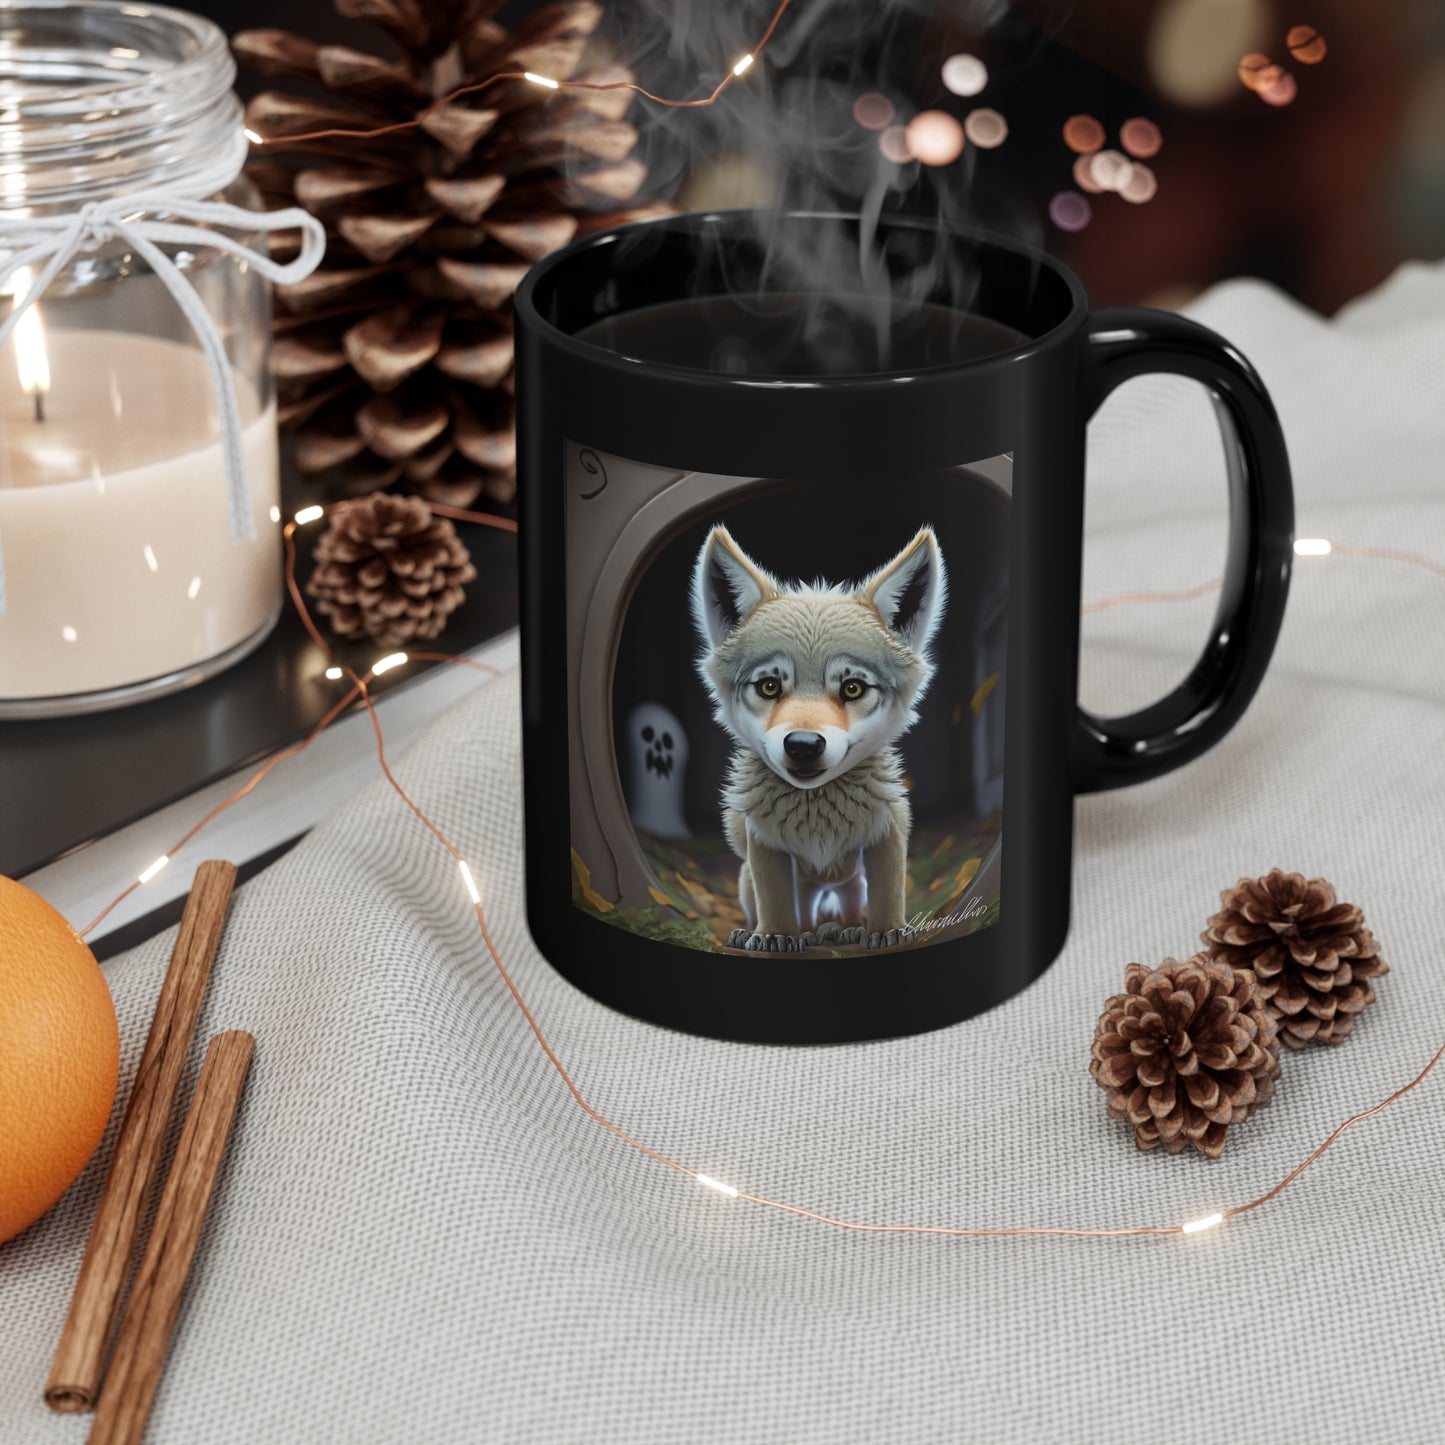 Are You There, Ghost? It’s Me, Wolf 11oz Black Mug